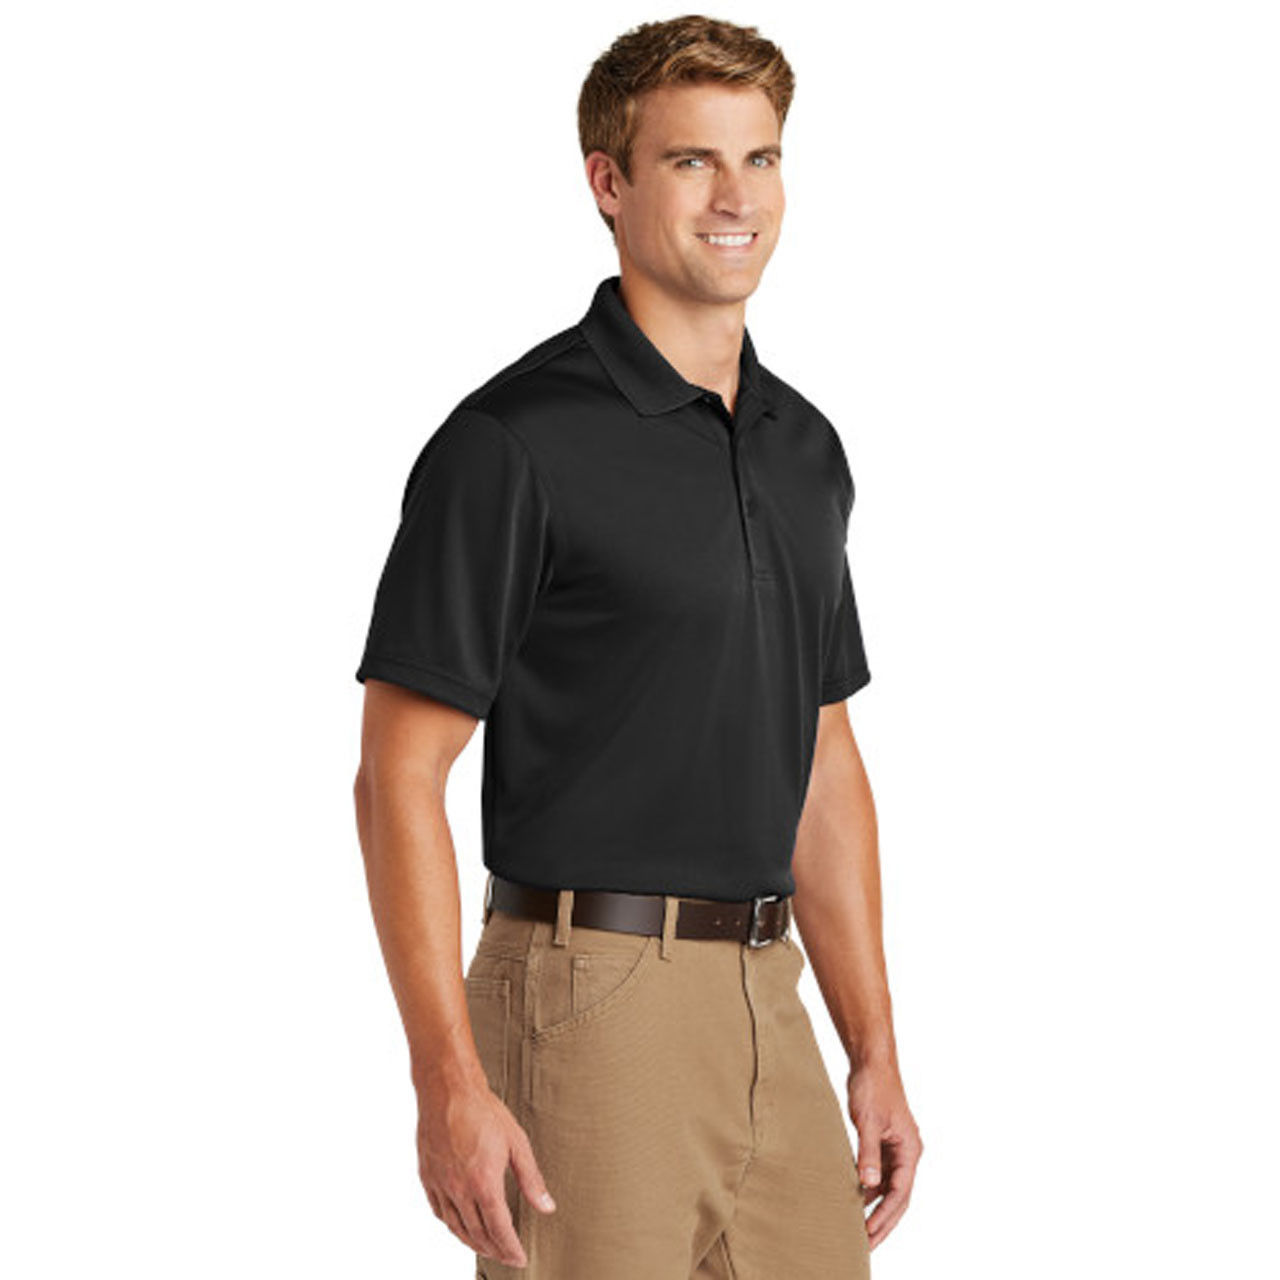 Can the men's black polo shirt be worn on any occasion?